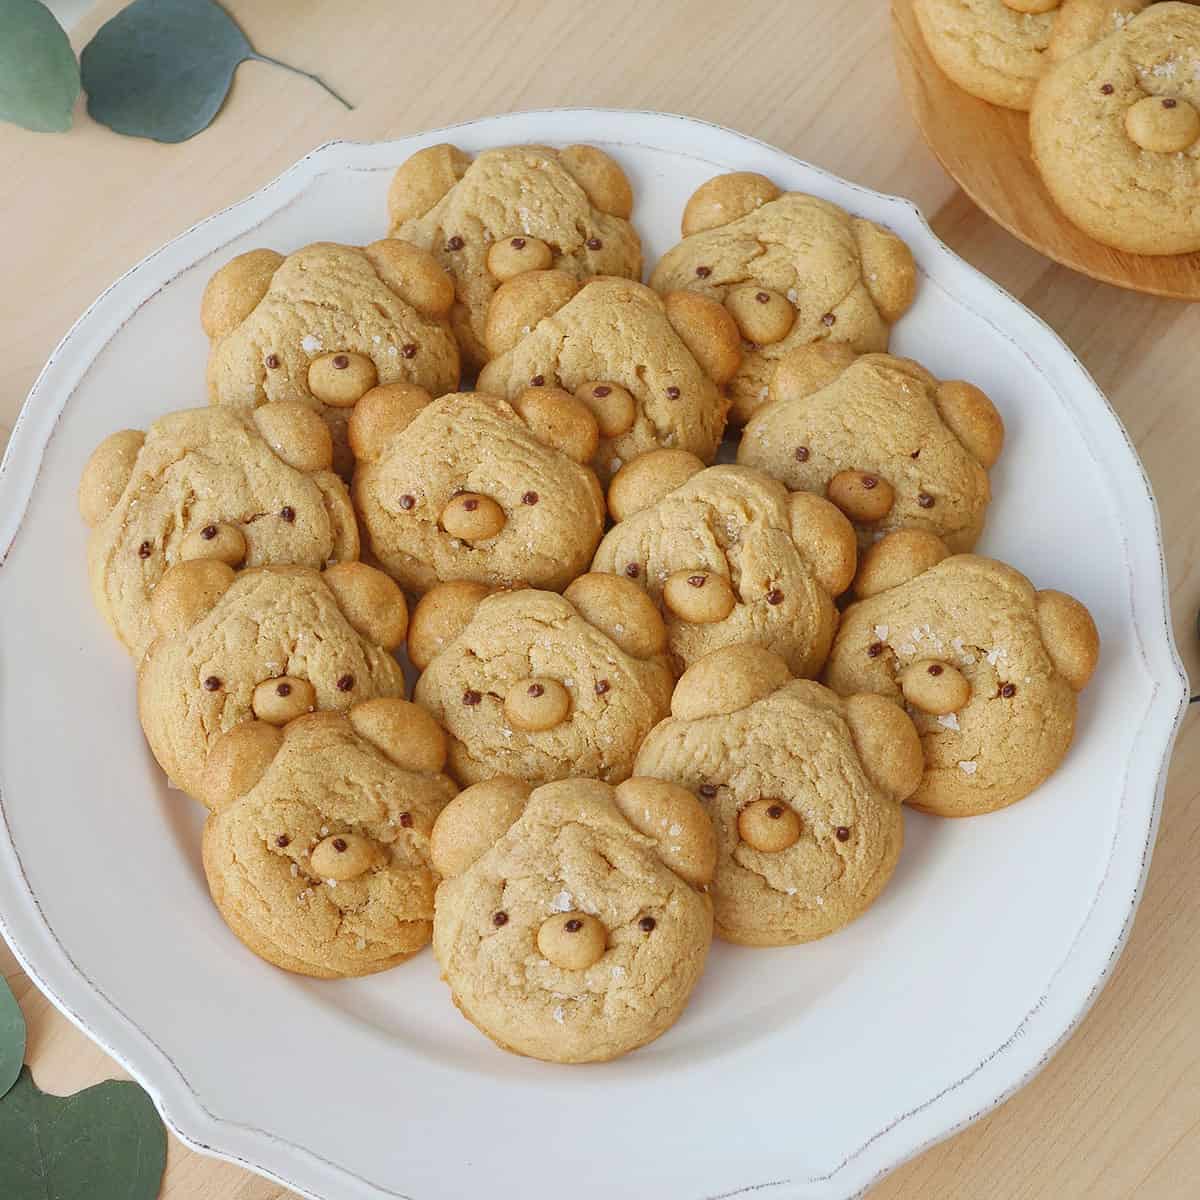 A plate filled with bear shaped cookies.